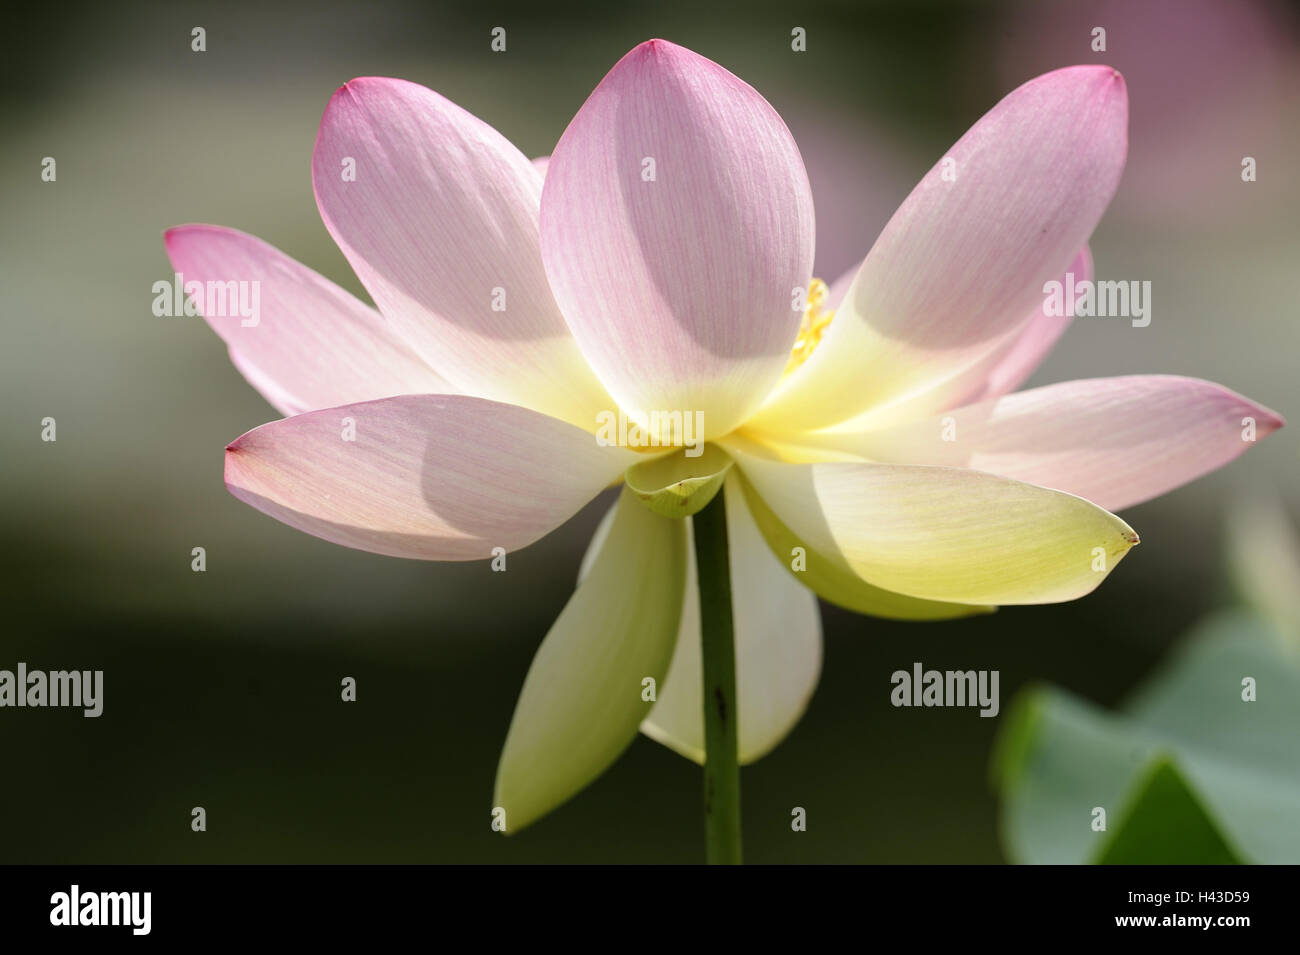 Lotus, blossom, pink, plant, water plant, Lotusblume, blossom, Lotosblüte, period of bloom, nature, Stock Photo